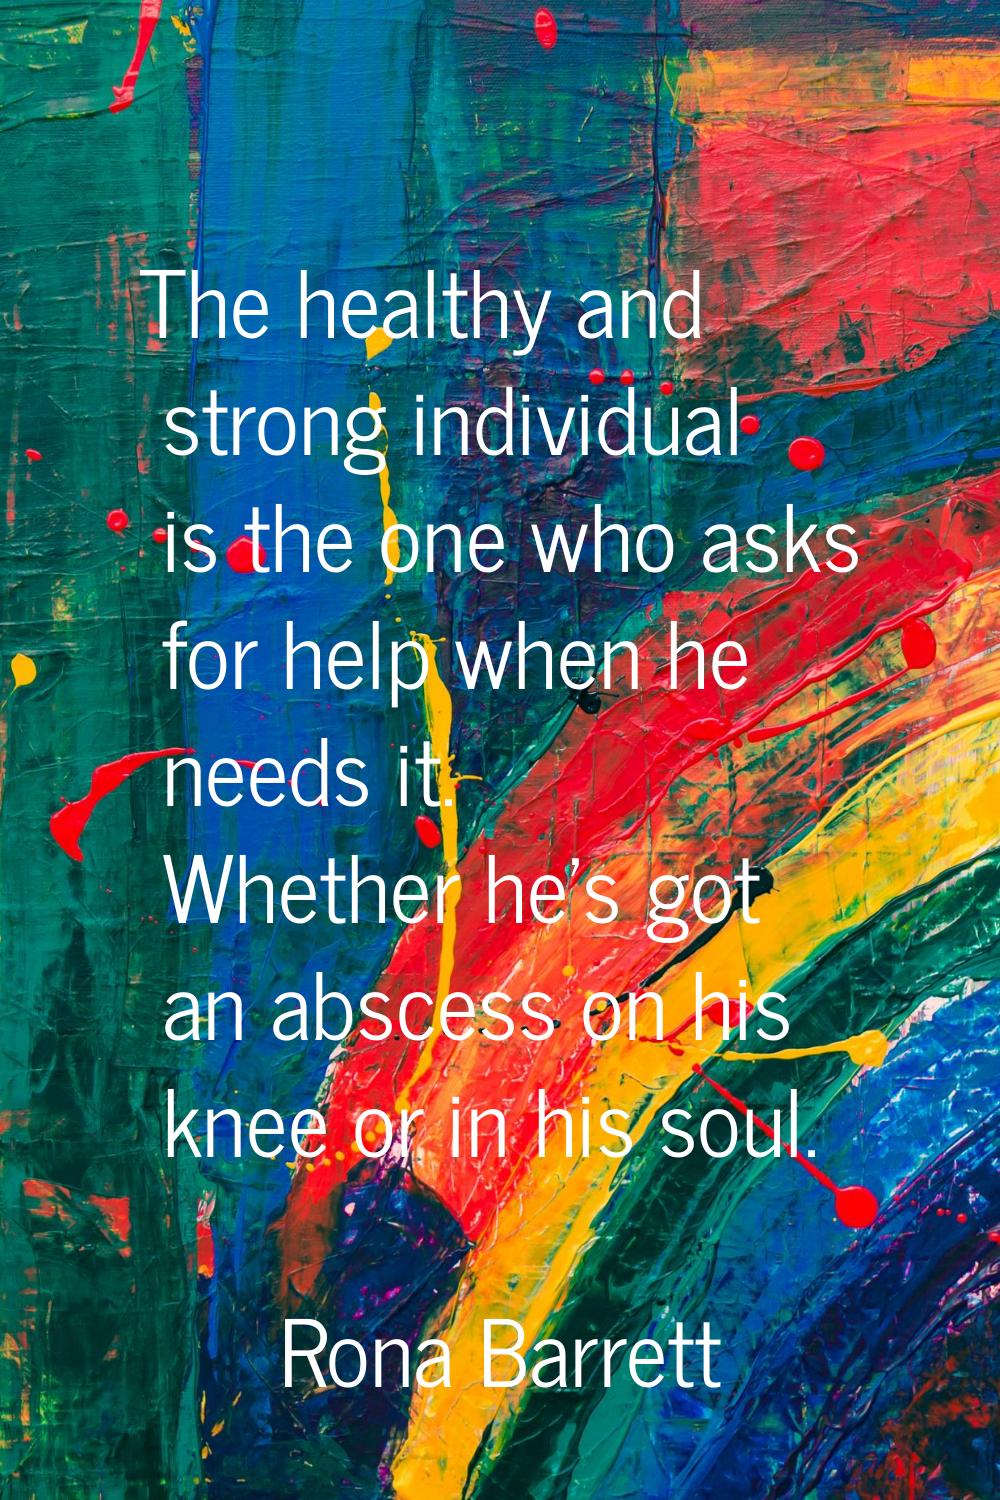 The healthy and strong individual is the one who asks for help when he needs it. Whether he's got a